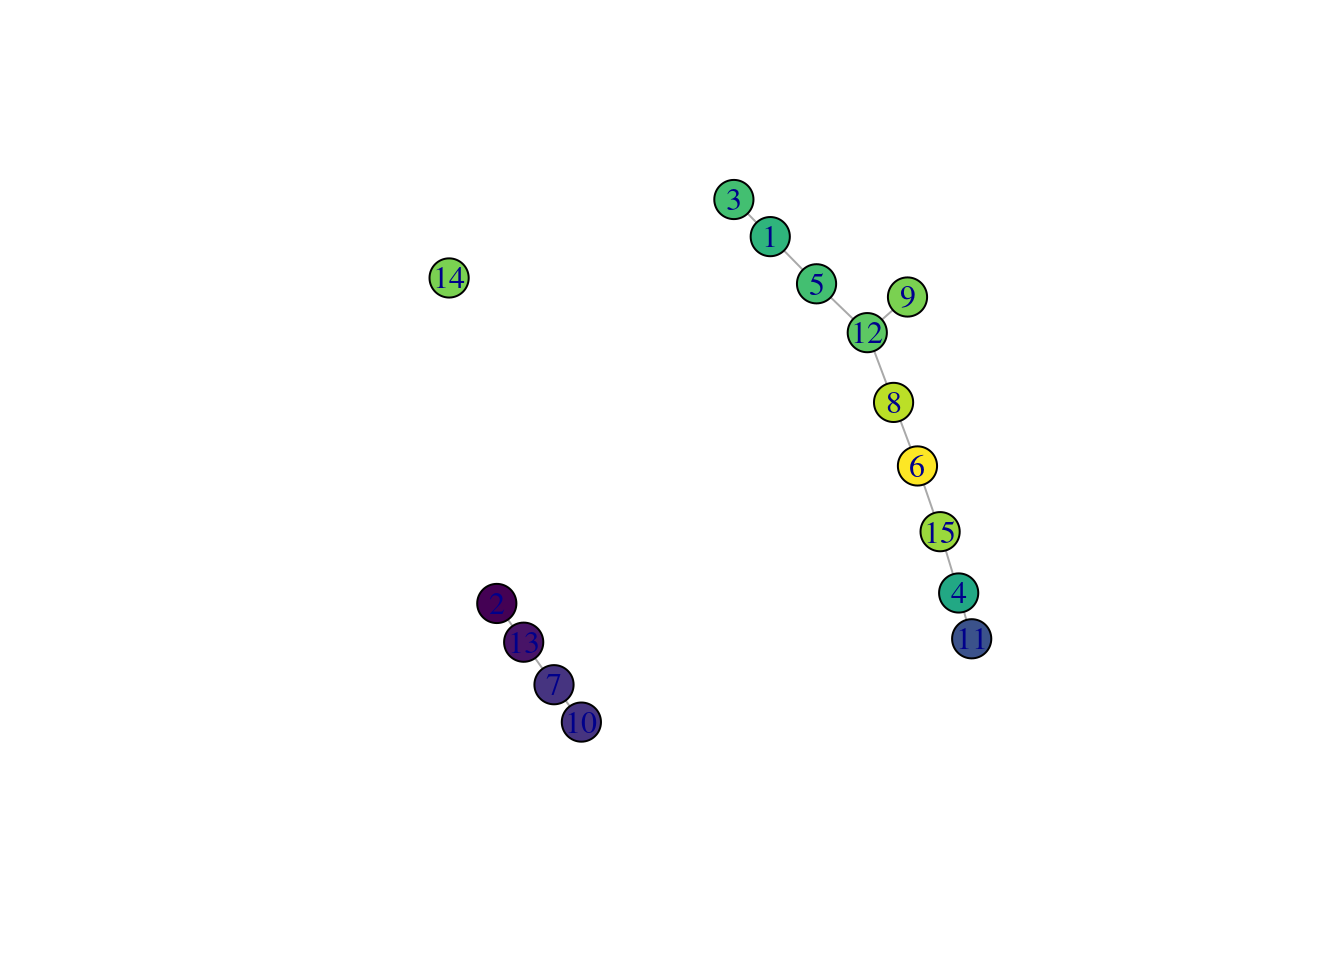 _TSCAN_-derived MST created from the Hermann spermatogenesis dataset. Each node is a cluster and is colored by the average velocity pseudotime of all cells in that cluster, from lowest (purple) to highest (yellow).